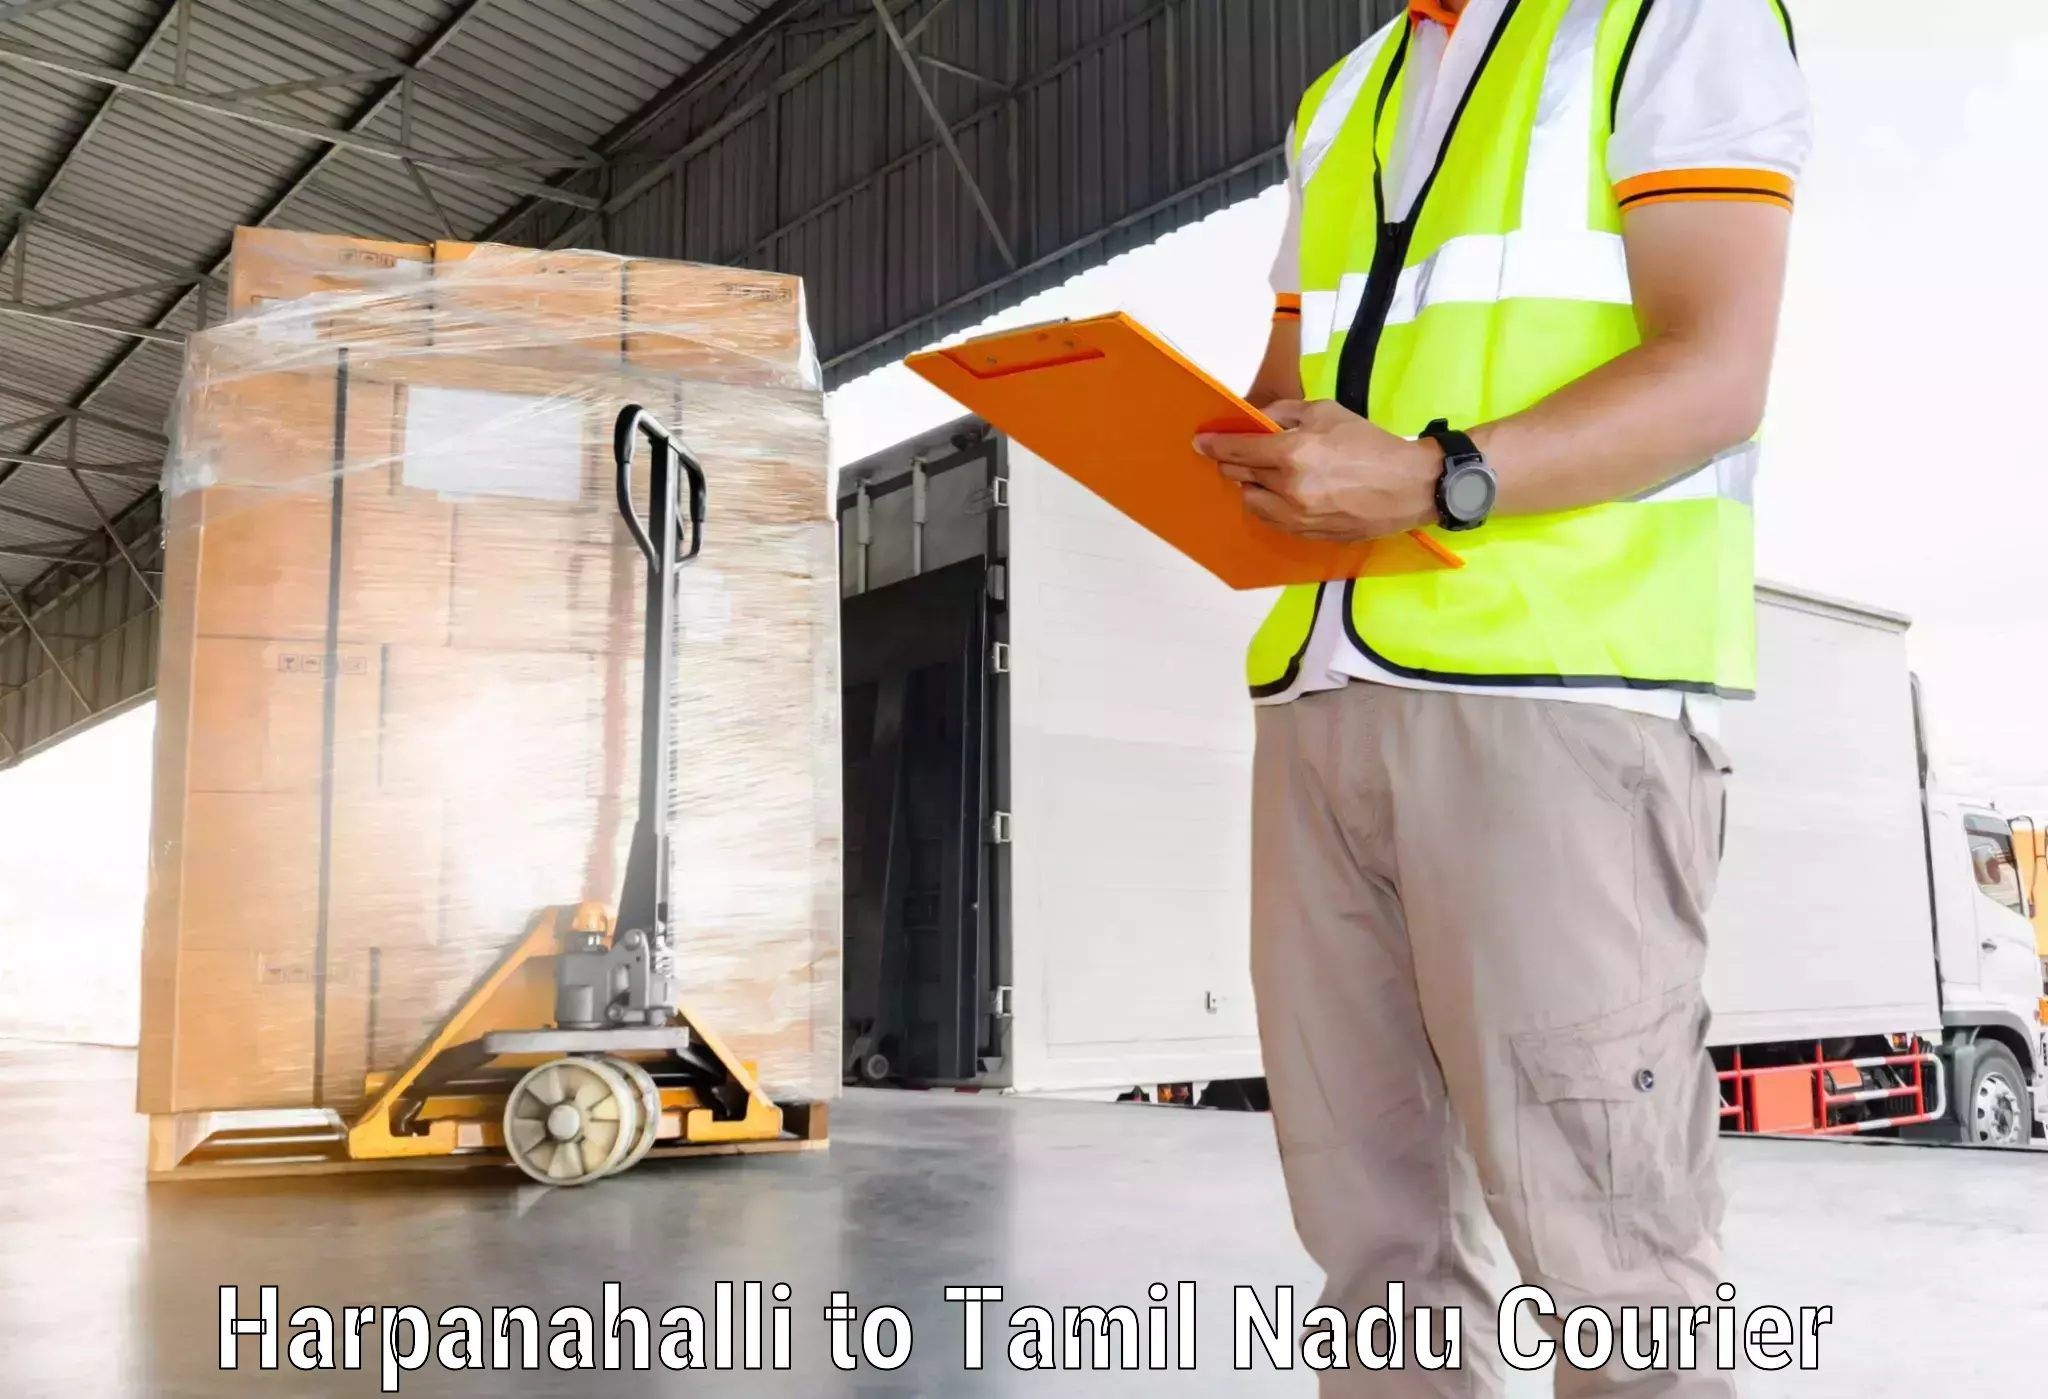 Affordable parcel rates in Harpanahalli to Vriddhachalam